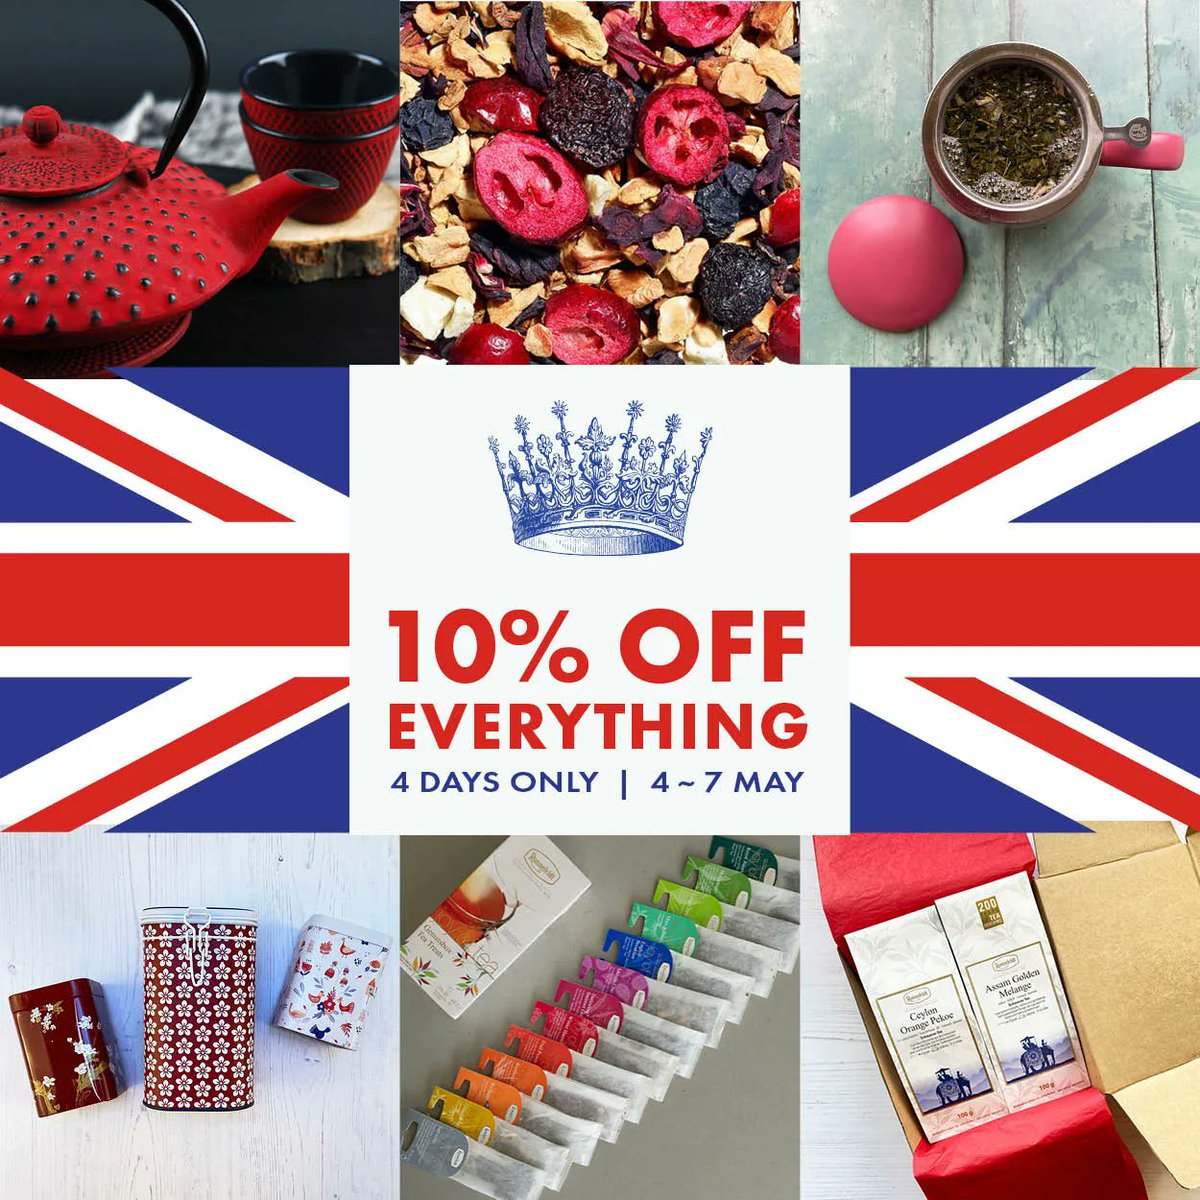 👑 Celebrate the King's Coronation with Cup of Tea! 
🧡 10% OFF EVERYTHING 
👉 4 DAYS ONLY 
📅 4th - 7th May

#cupoftea  #teasale #cupofteasale #flashsale #teadiscount #discount #tealeaves  #popthekettleon #kingscoronation #kingcharles #coronation2023 #celebratetea #celebrate